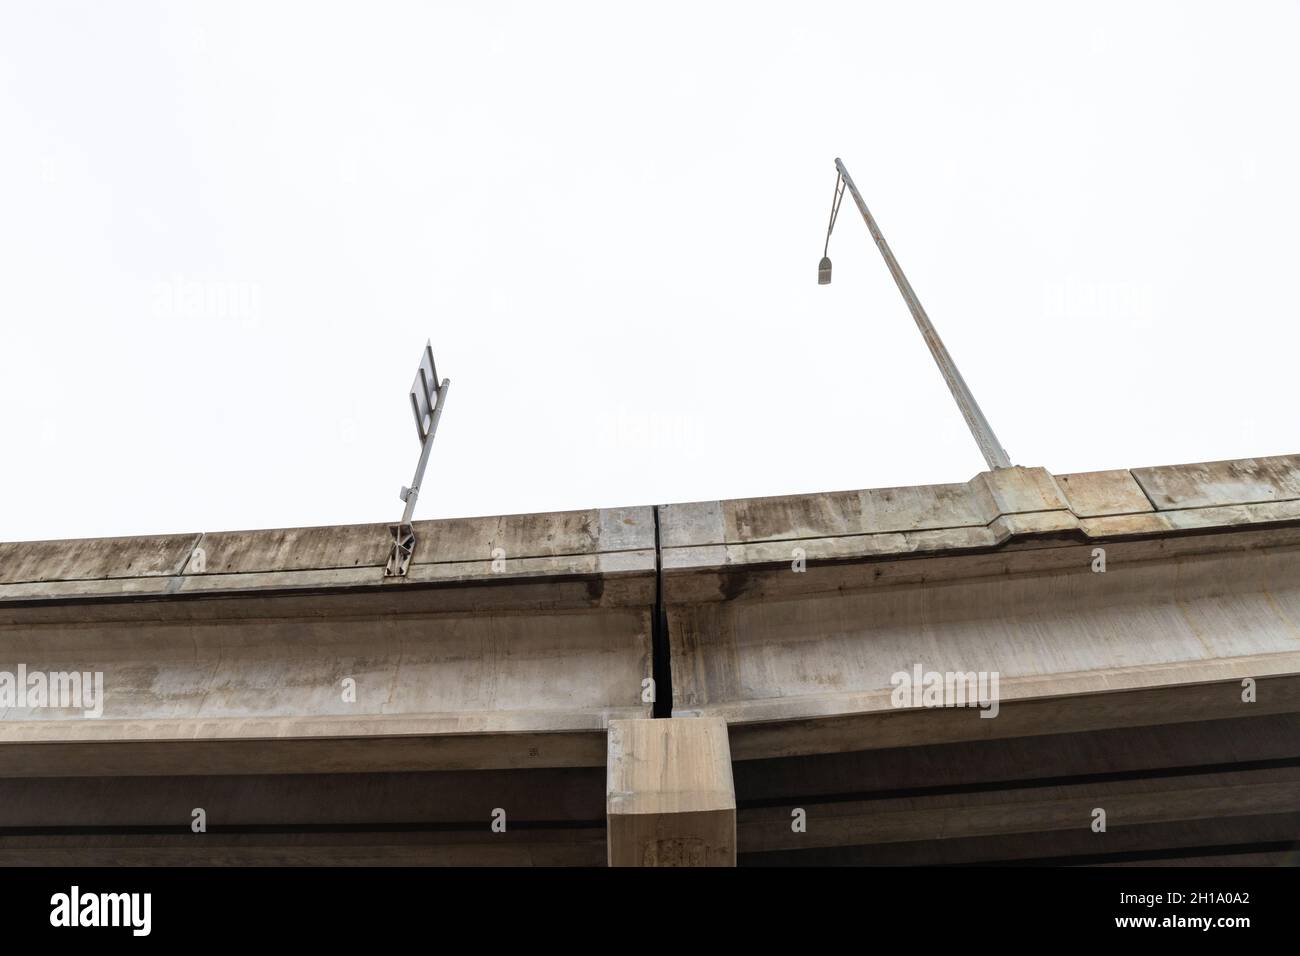 View looking up at the concrete supports of an elevated roadway bridge with light stanchion and sign post, horizontal aspect Stock Photo